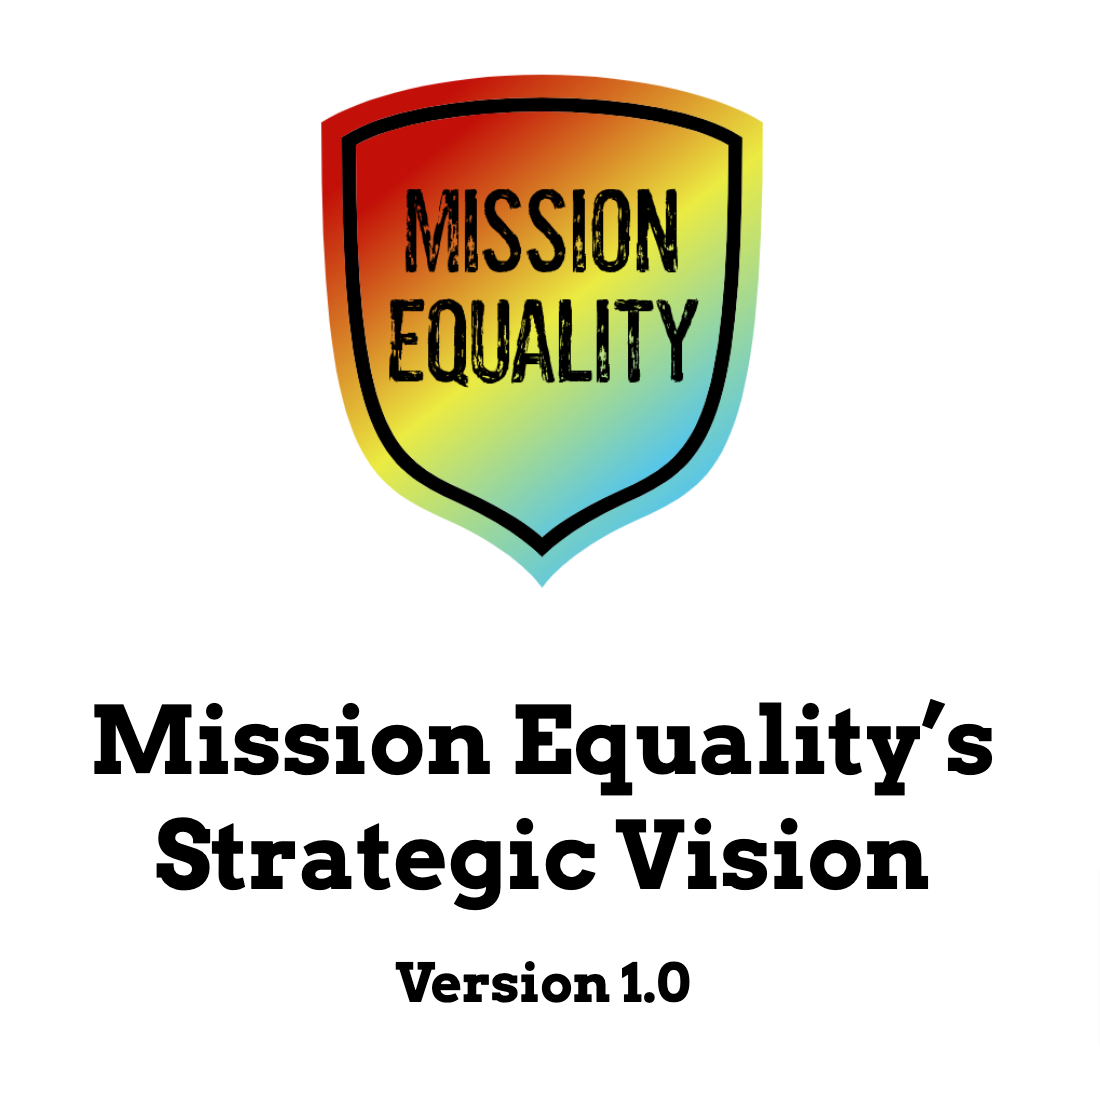 Graphic of the front page of Mission Equality's strategic vision document, available for download.